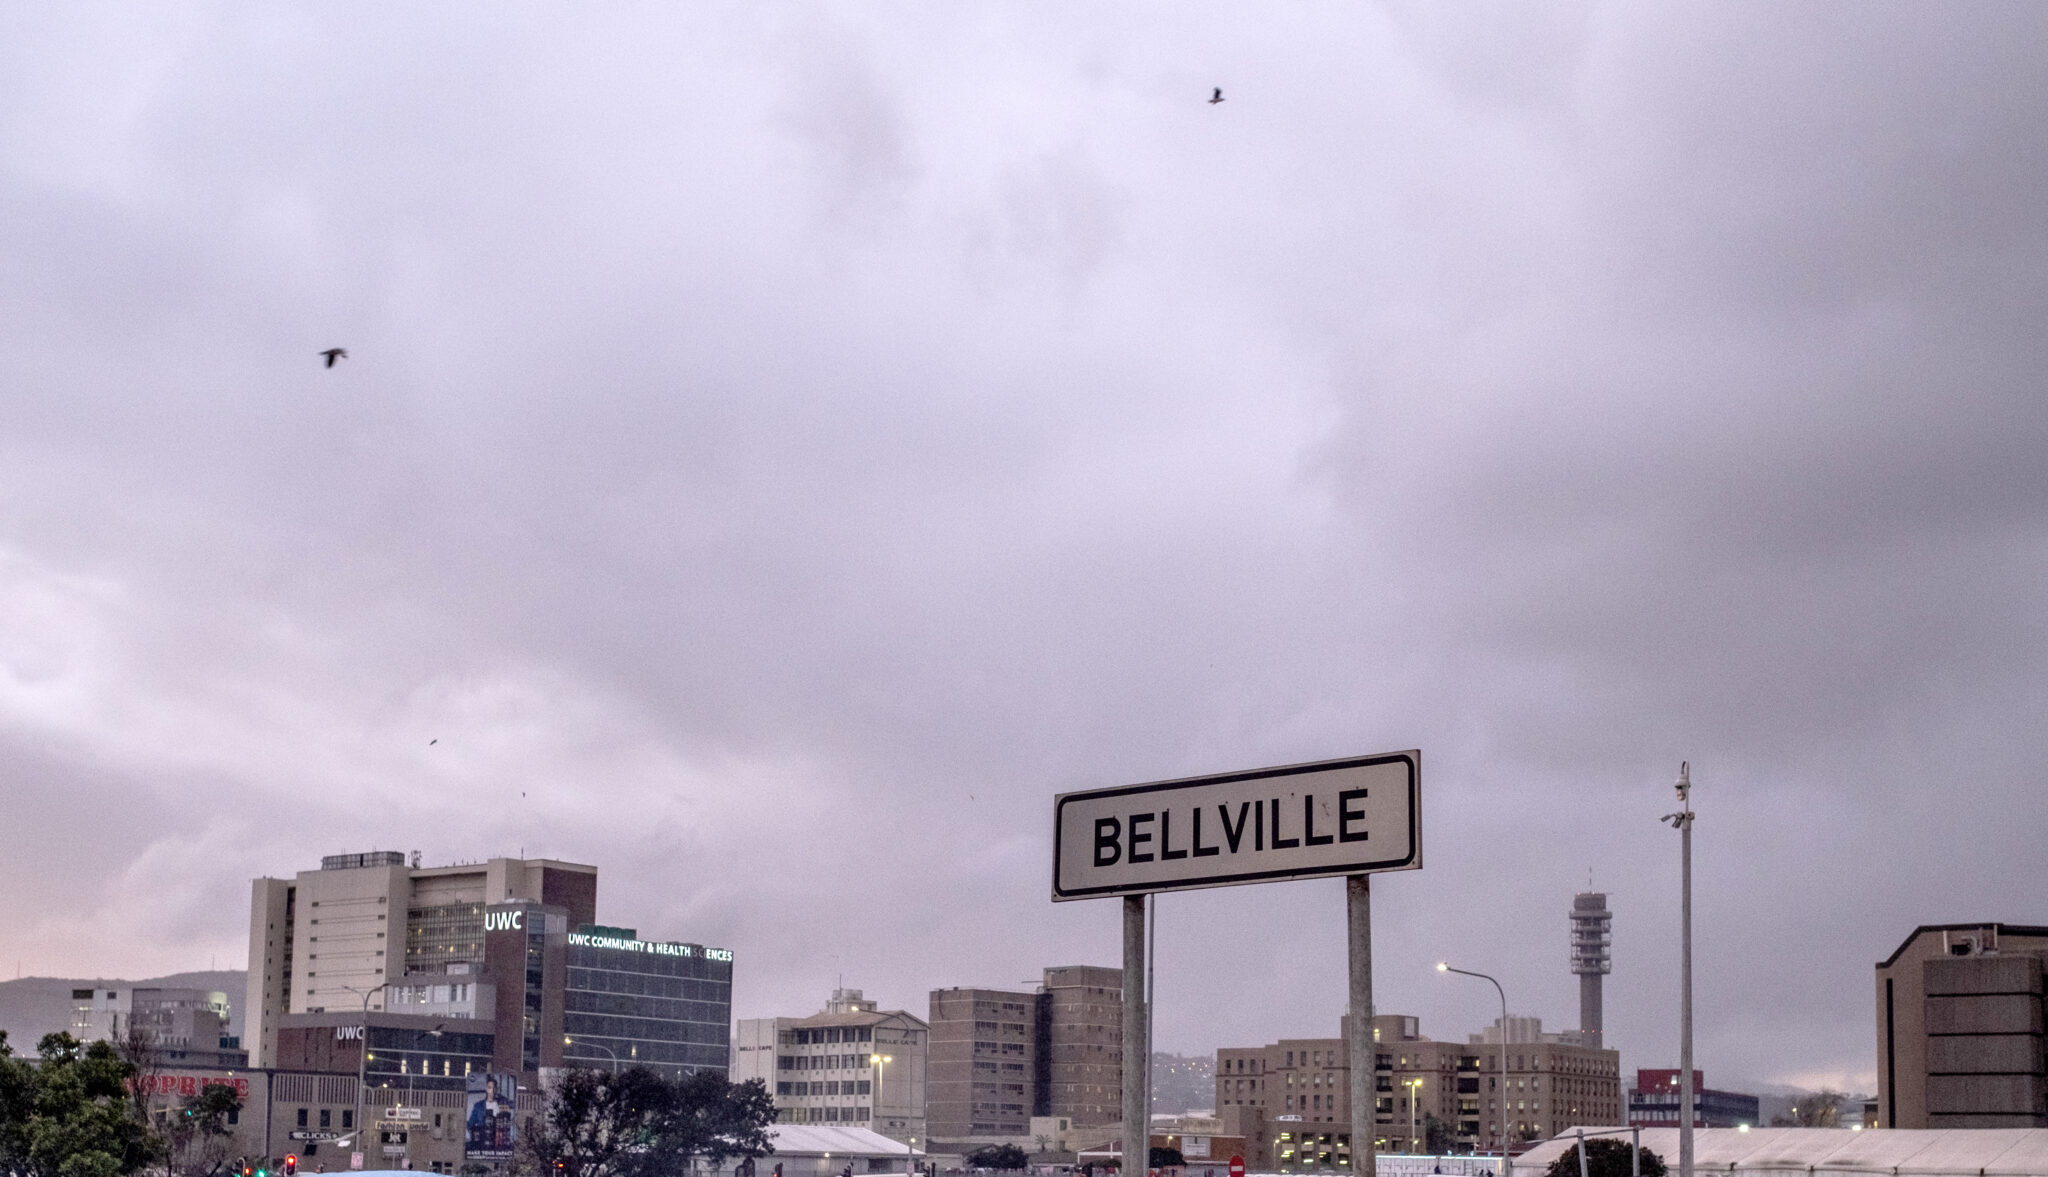 Greater Tygerberg Partnership invites the public to comment on Bellville’s future